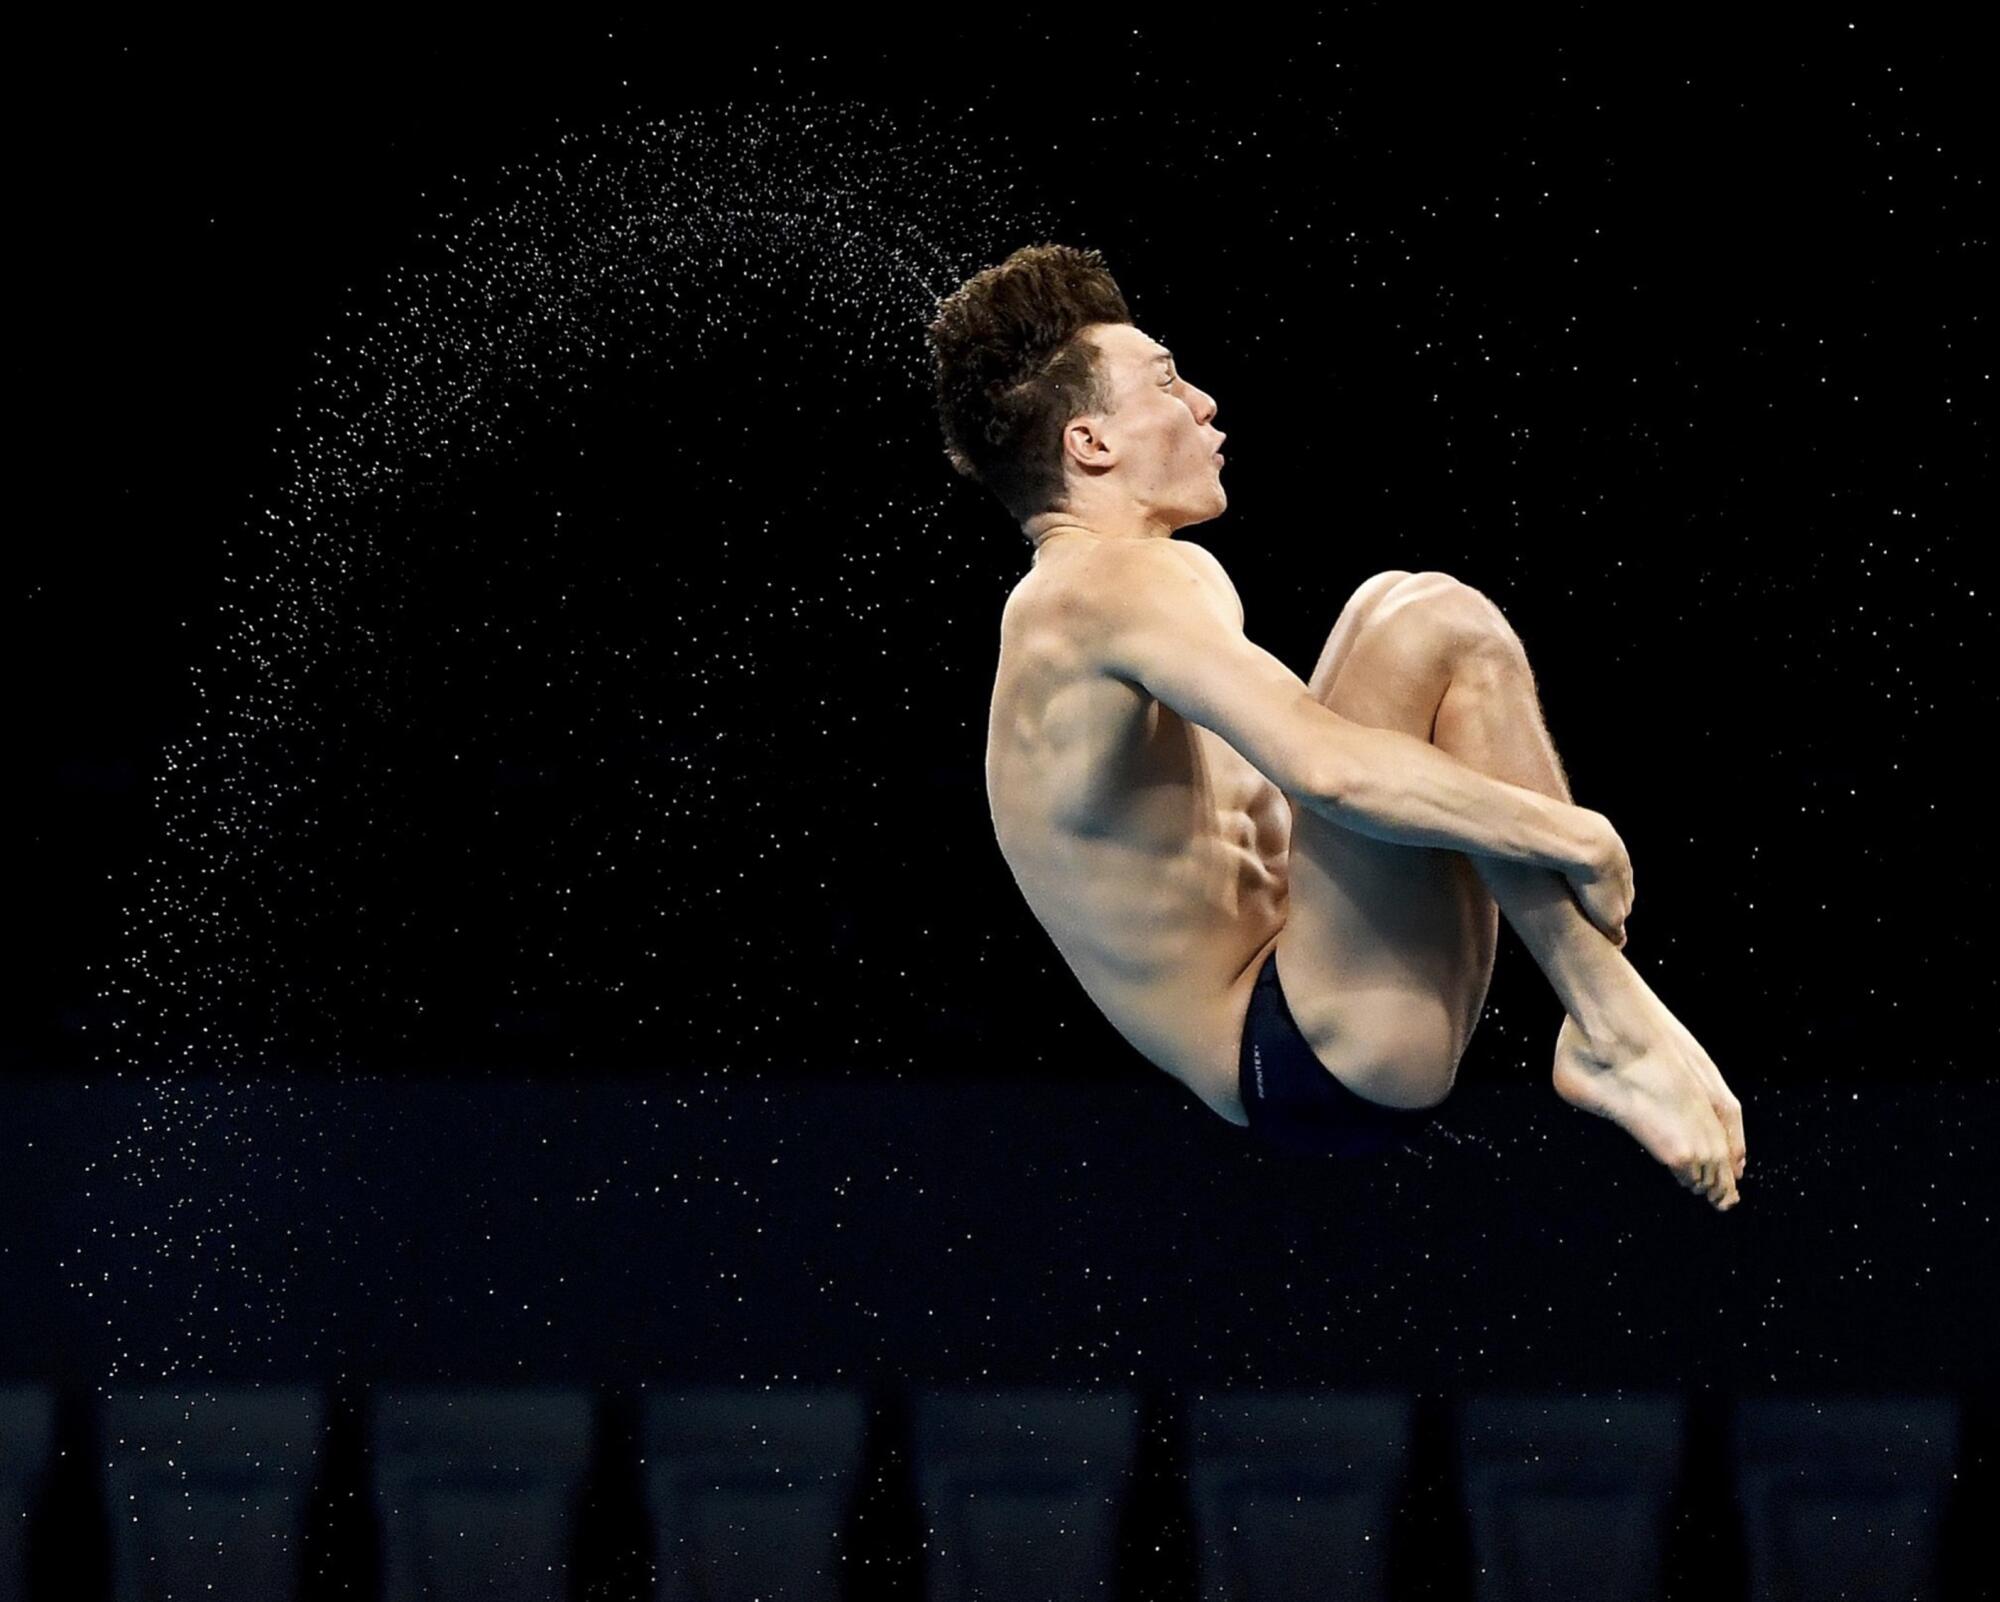  A diver holds his legs in midair.